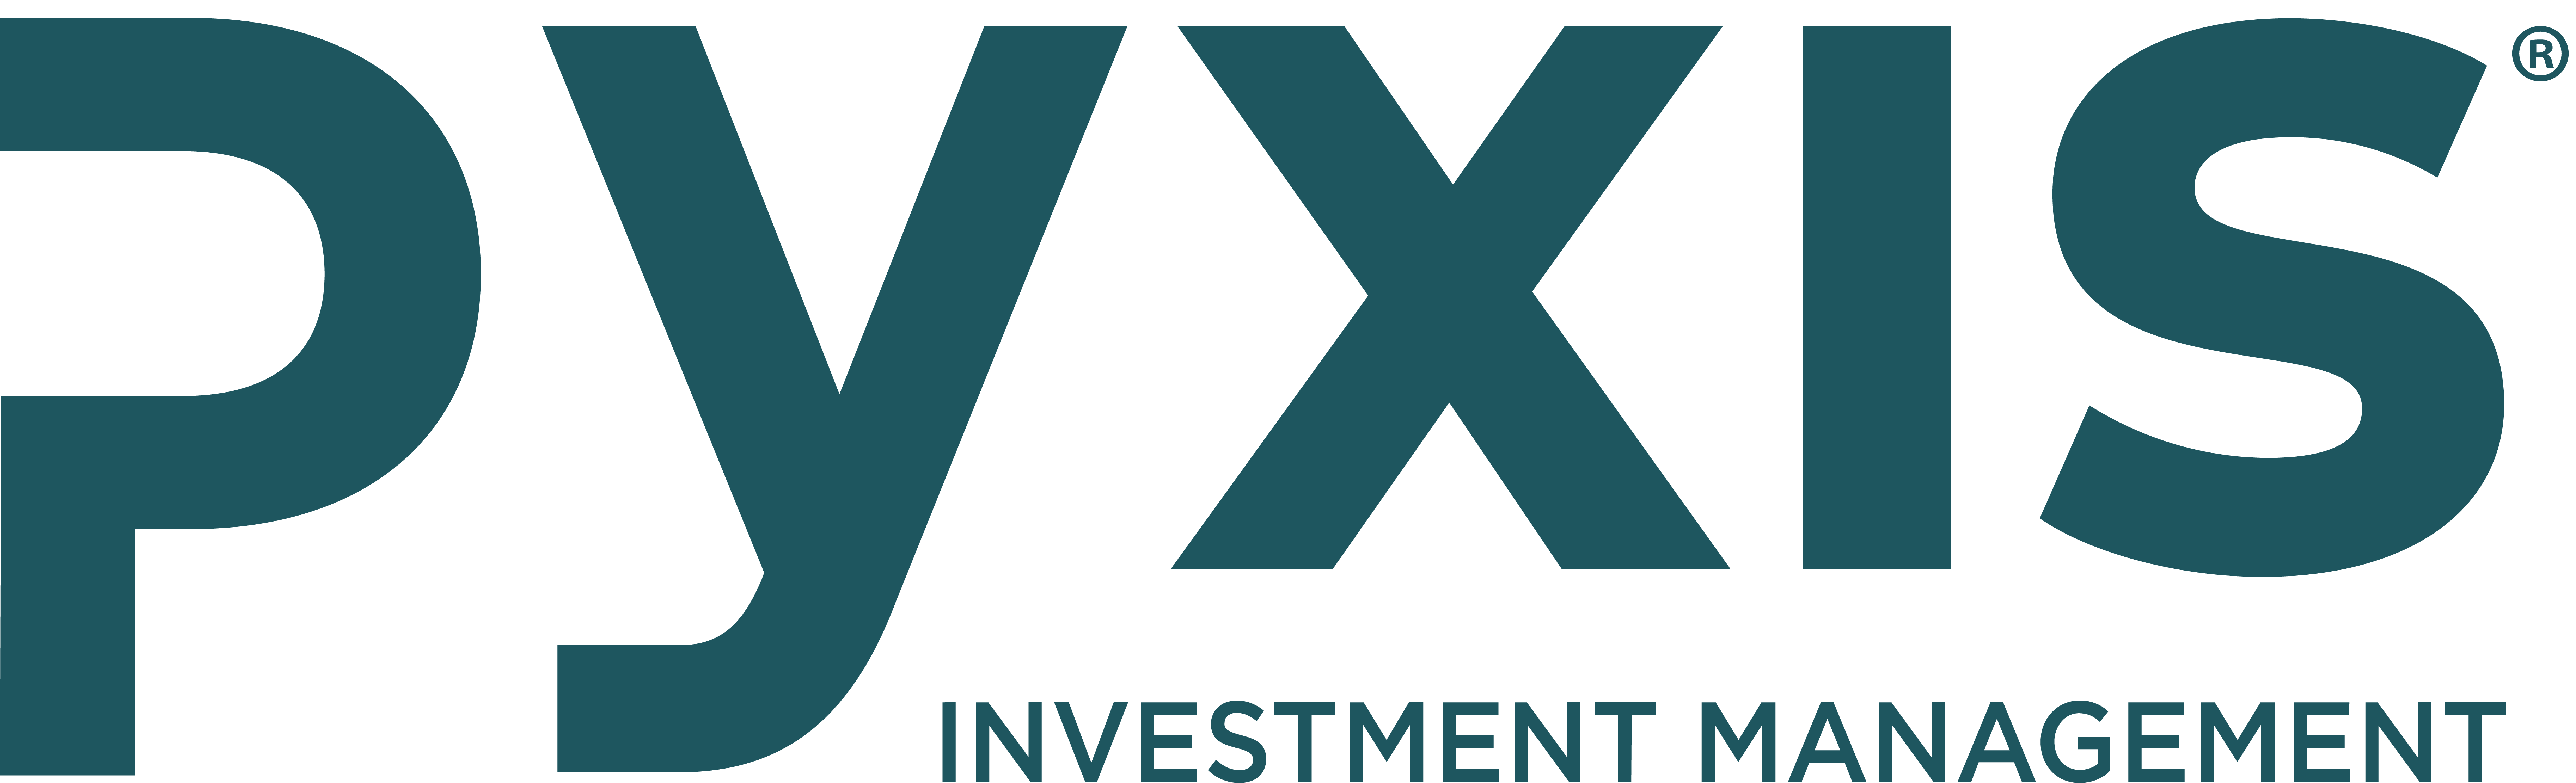 pyxis investment and asset management